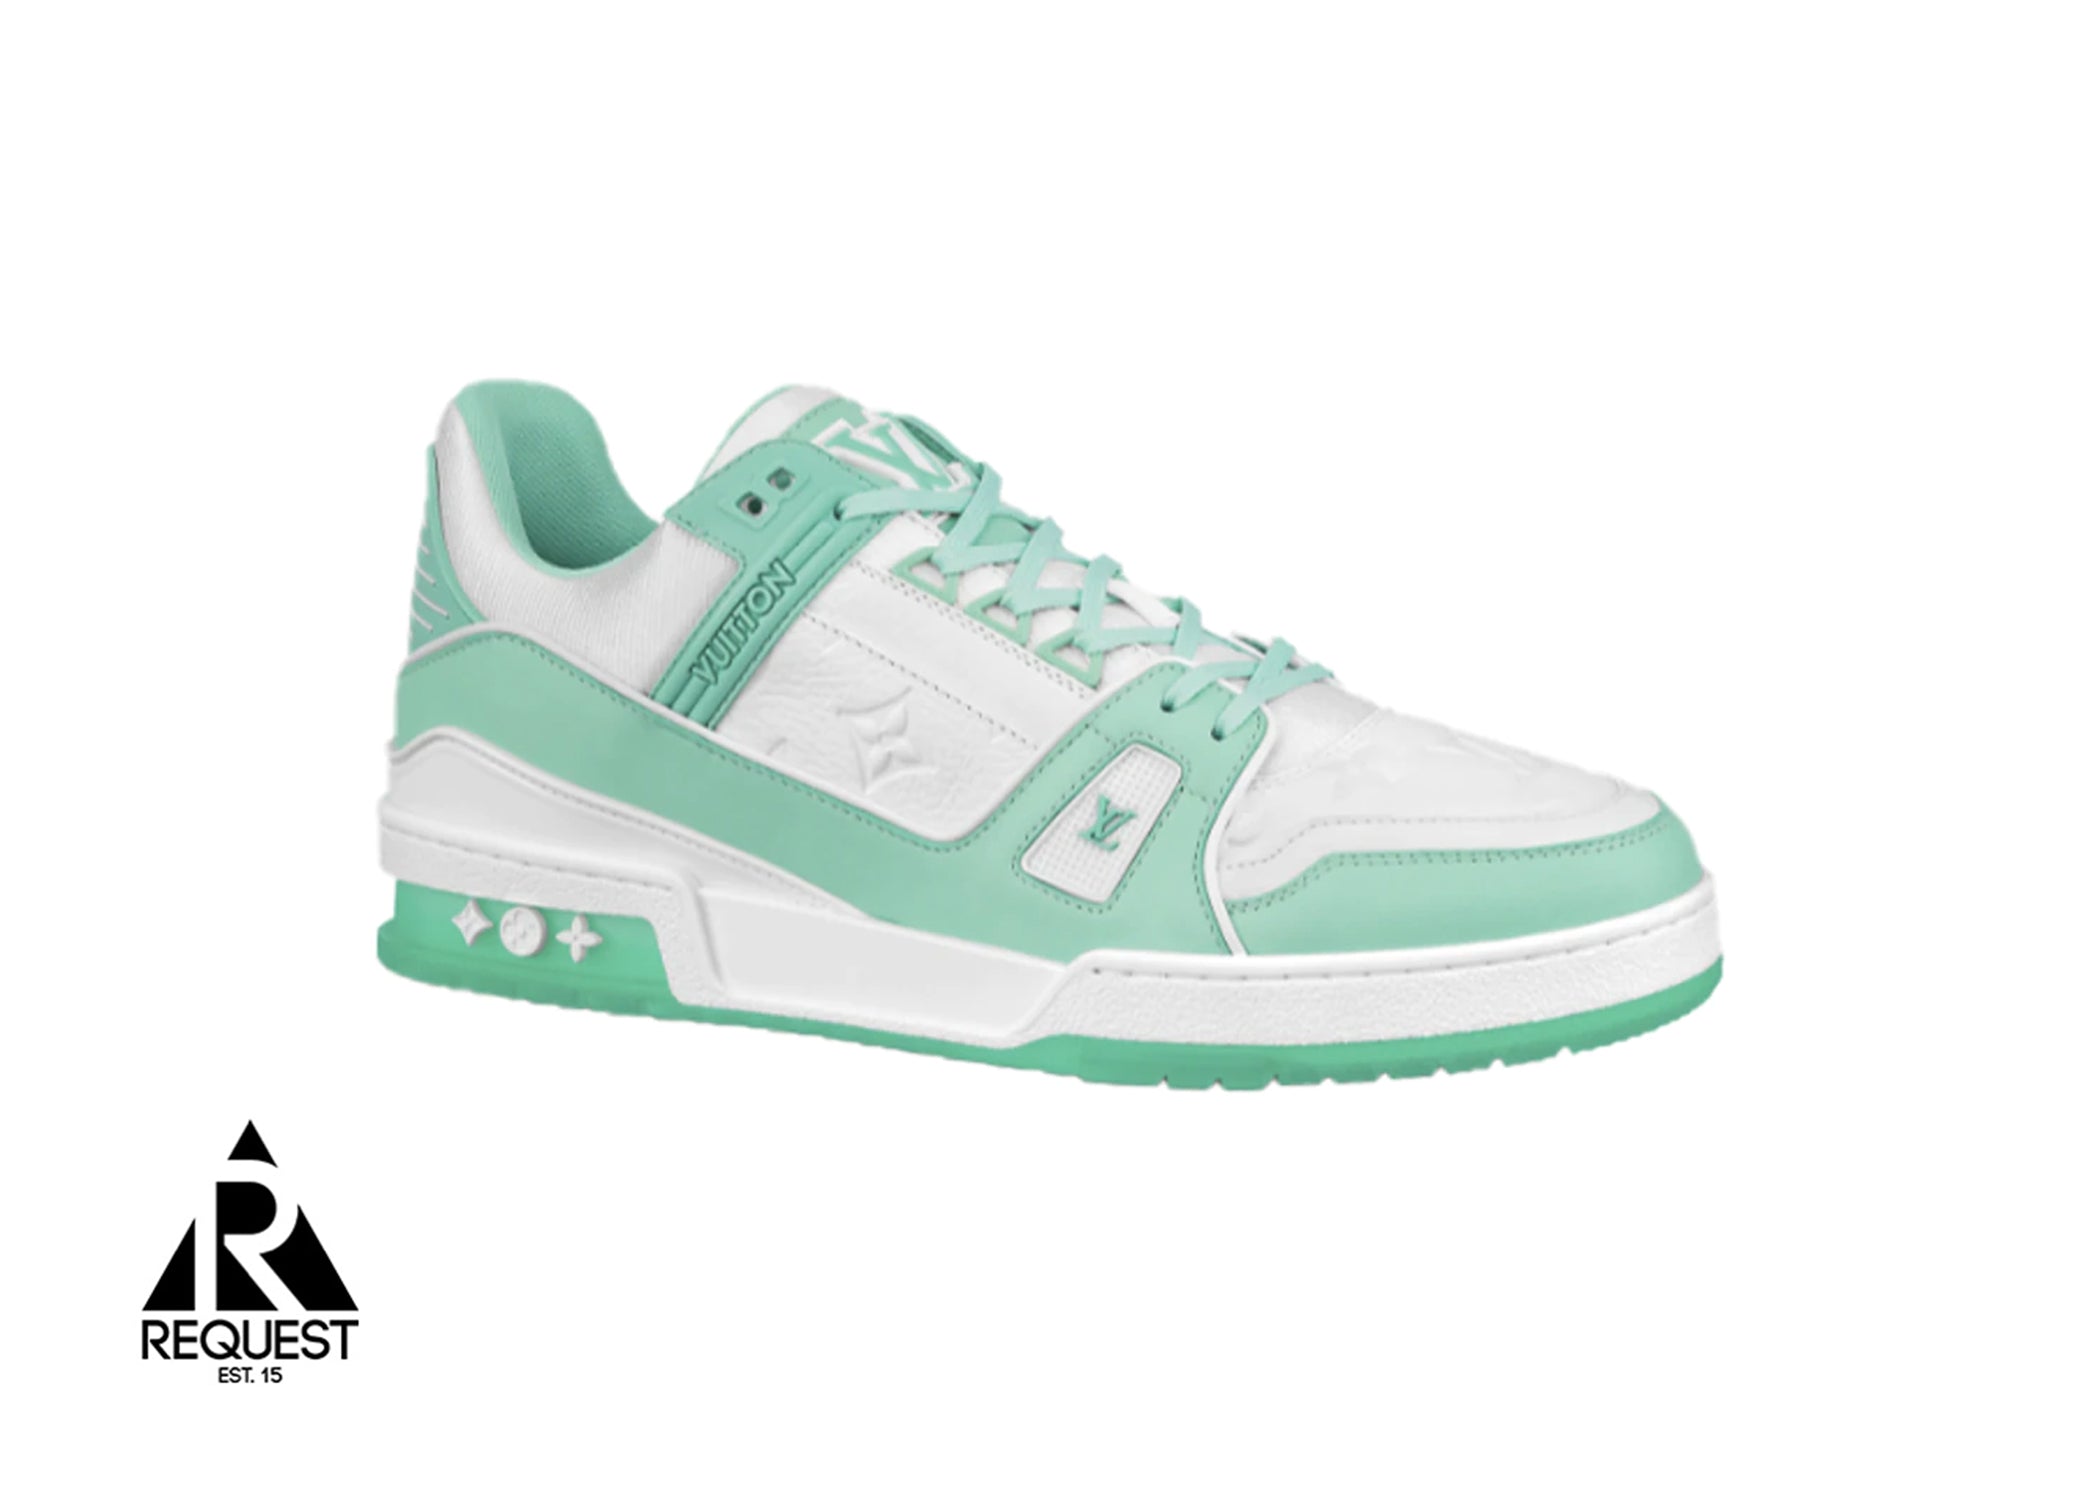 Louis Vuitton Trainer Low “Teal White”